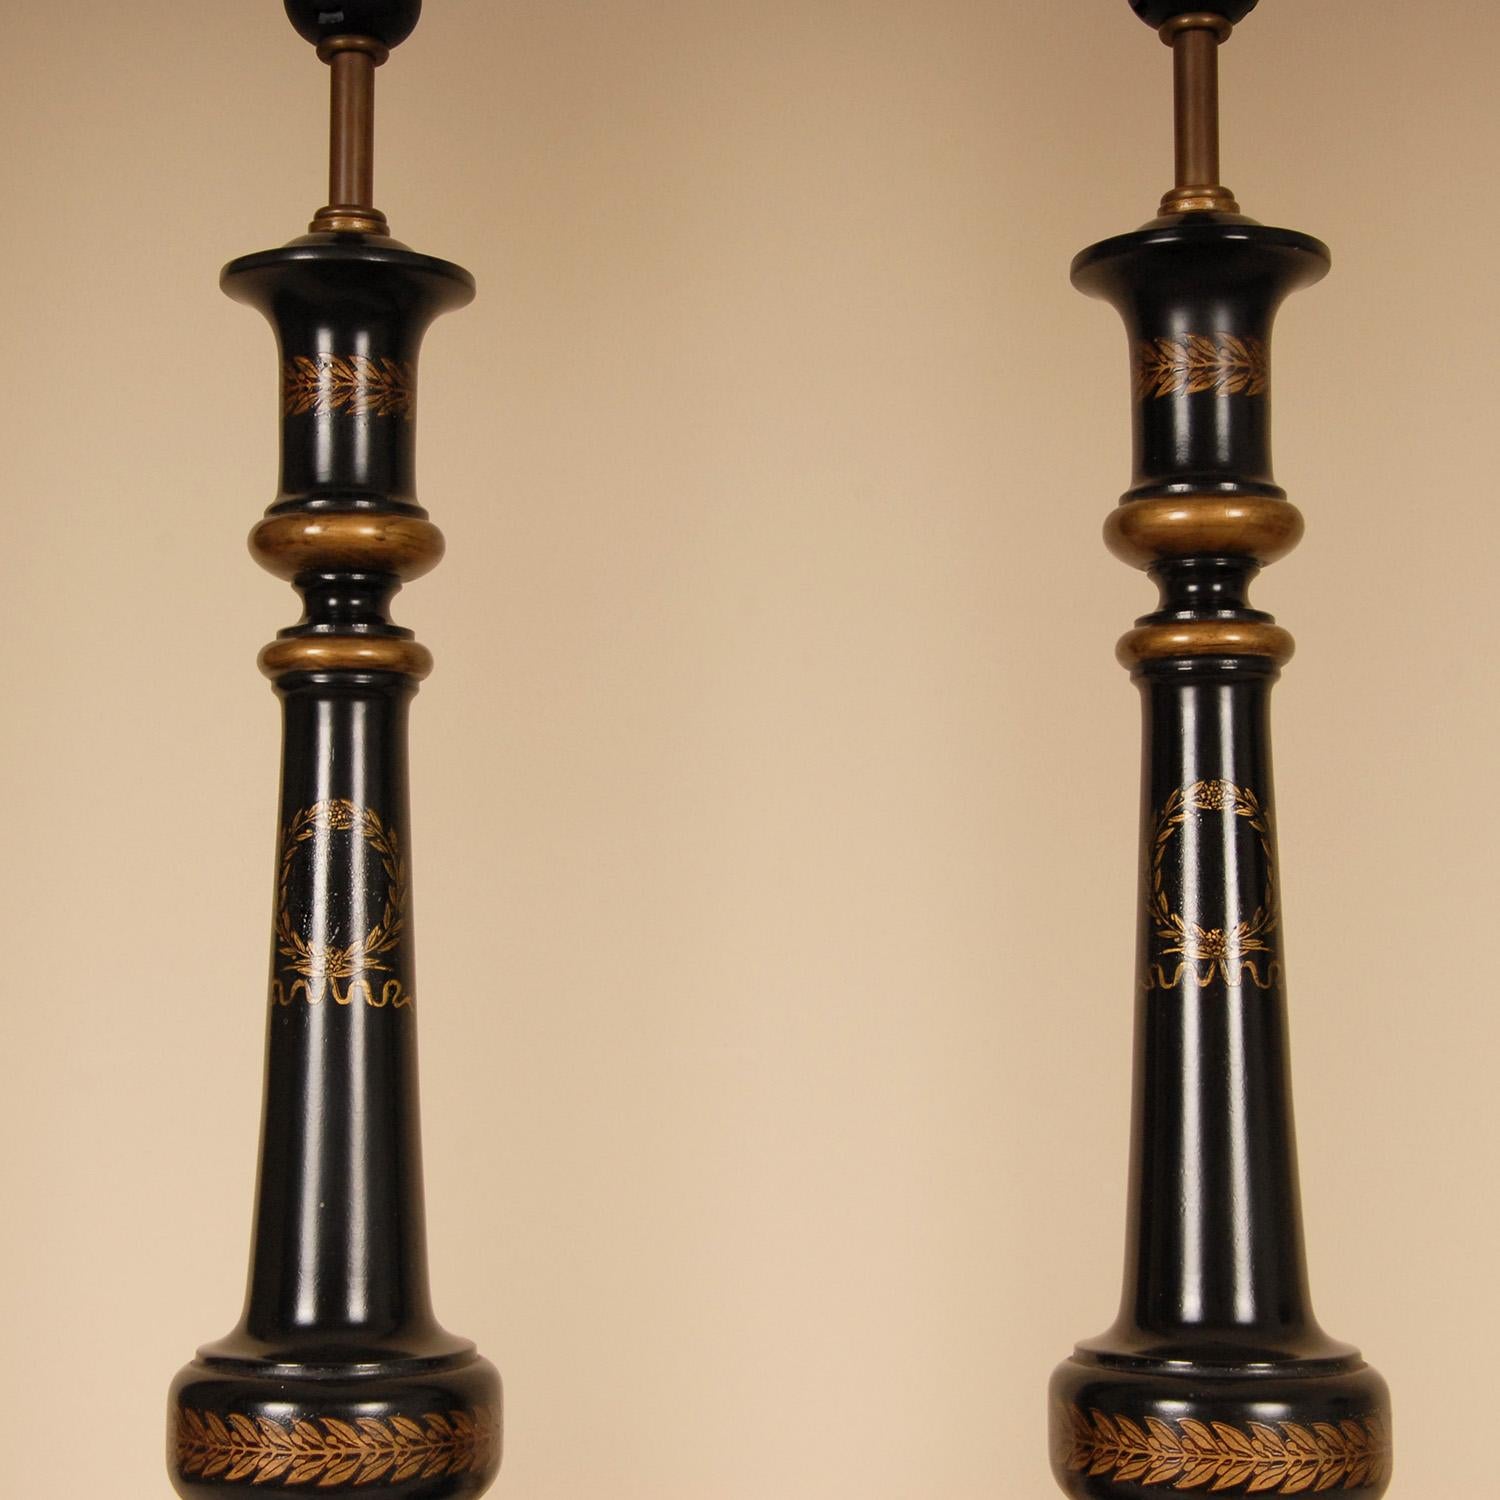 English Traditional Lamps Gold Black Ebonised wood High End Table Lamps In Good Condition For Sale In Wommelgem, VAN